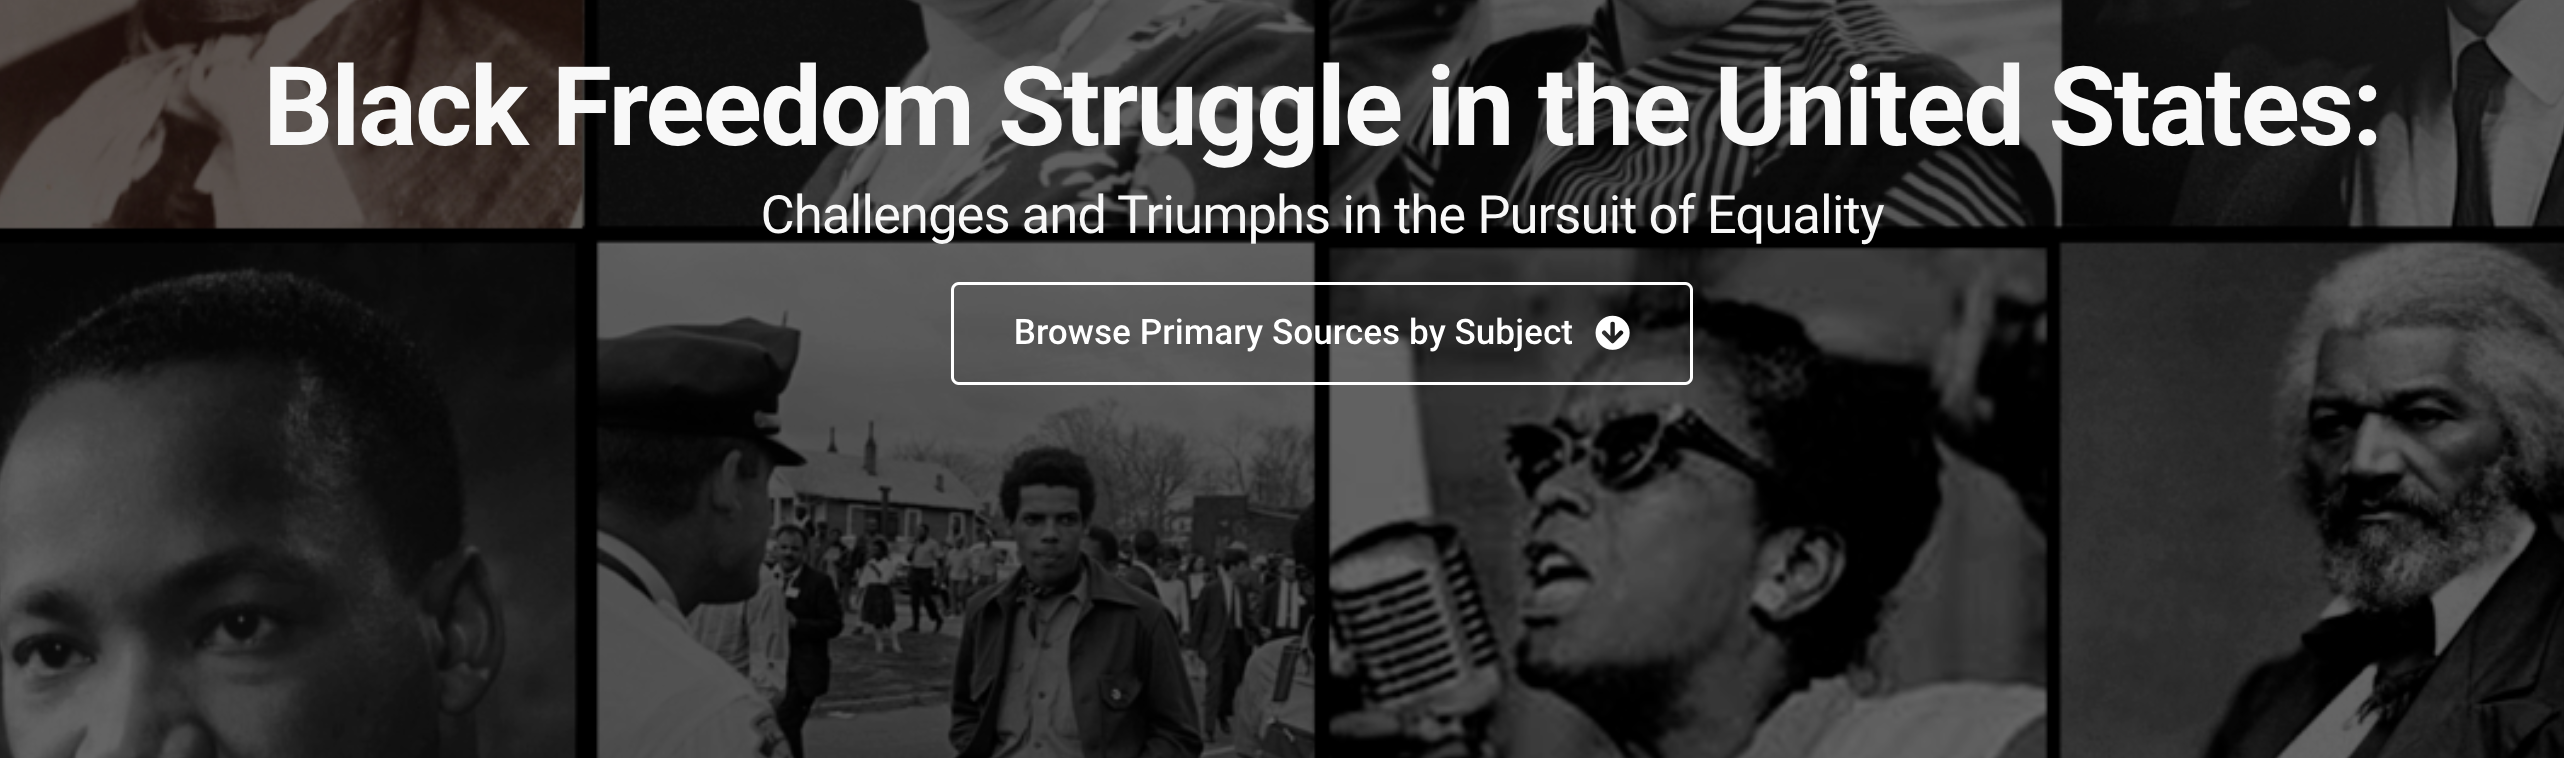 Proquest Black Freedom Struggle in the United States